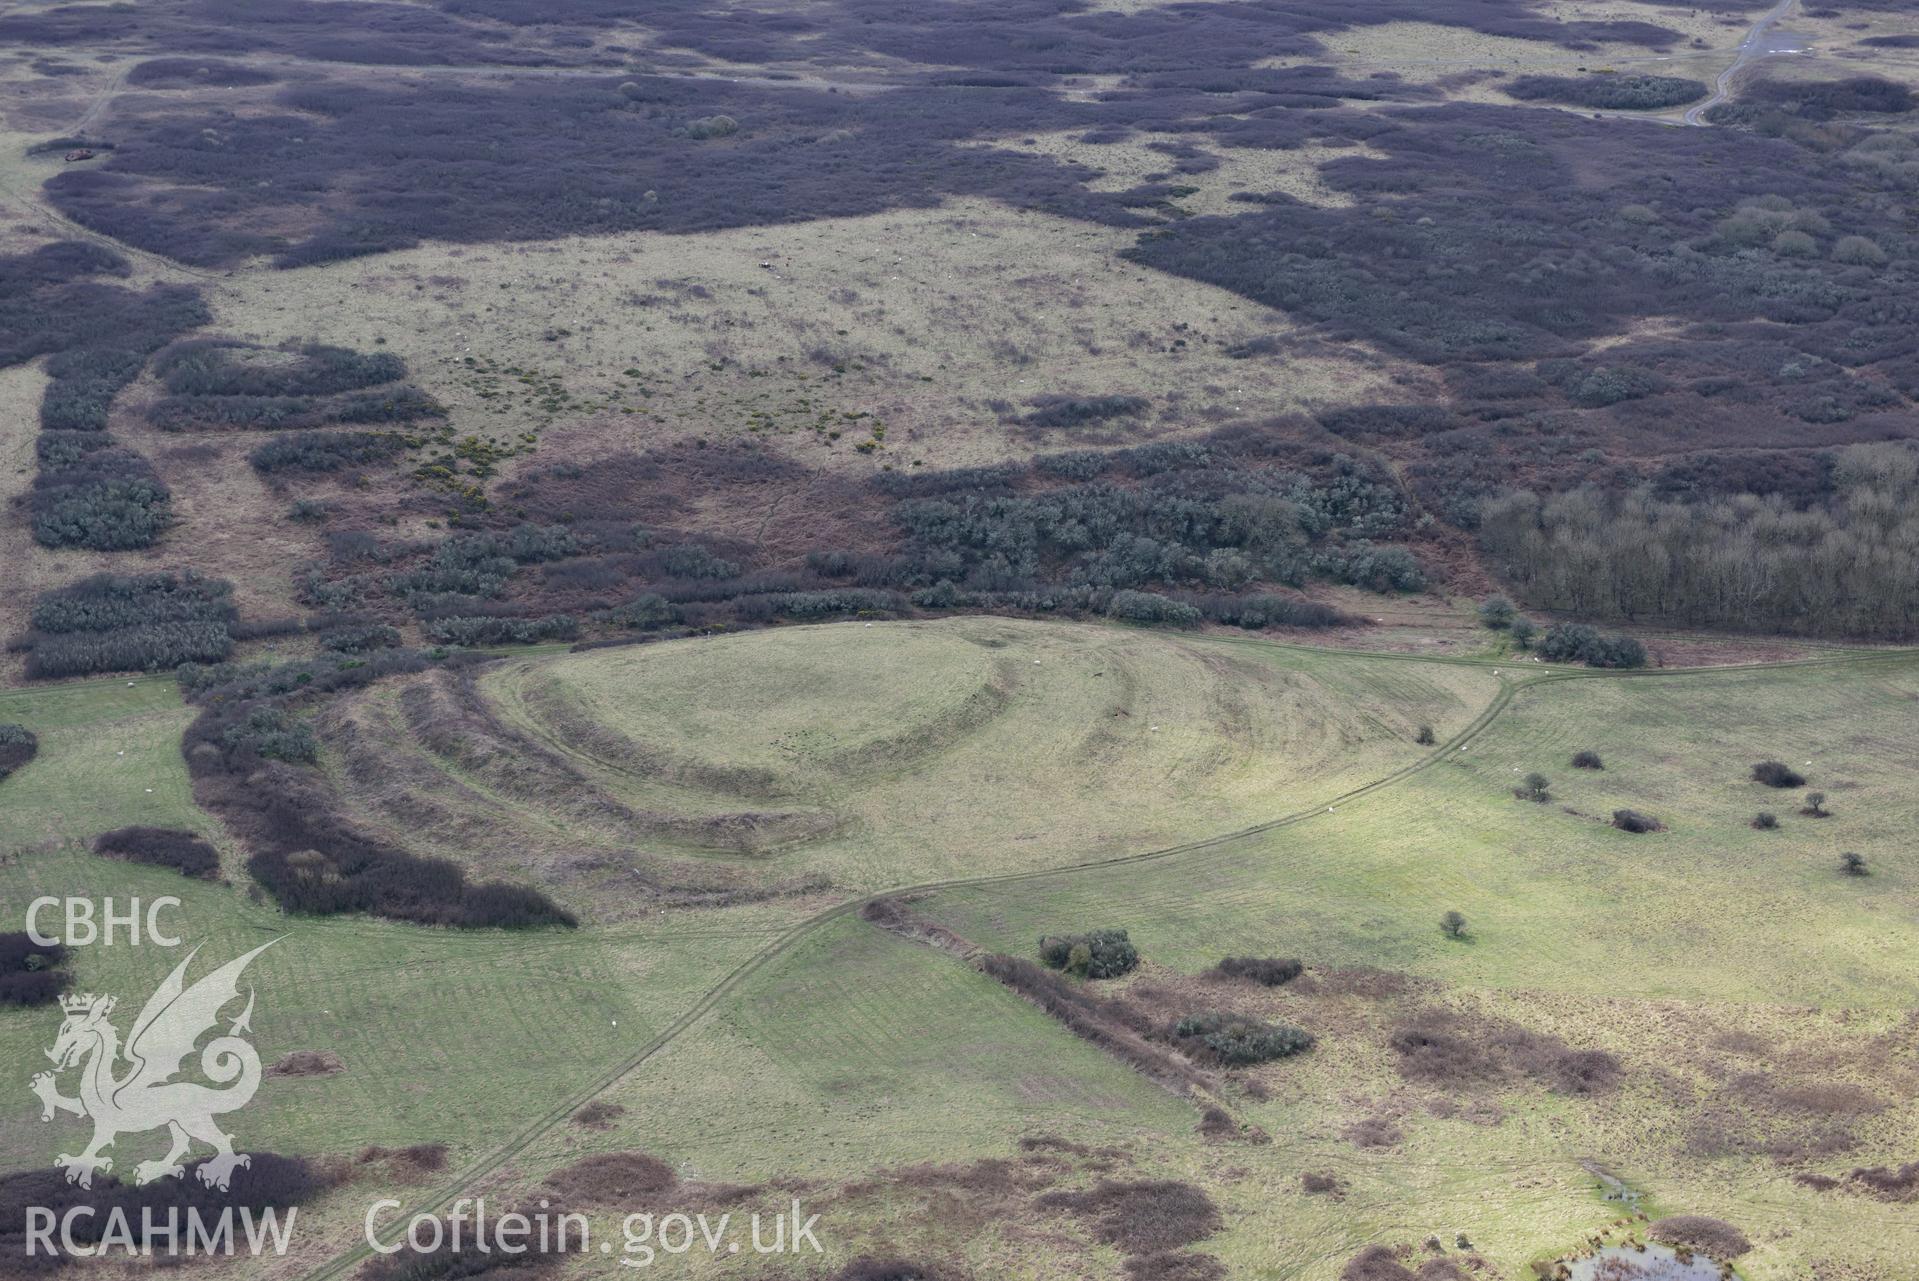 Bulliber Hill Camp. Baseline aerial reconnaissance survey for the CHERISH Project. ? Crown: CHERISH PROJECT 2018. Produced with EU funds through the Ireland Wales Co-operation Programme 2014-2020. All material made freely available through the Open Government Licence.